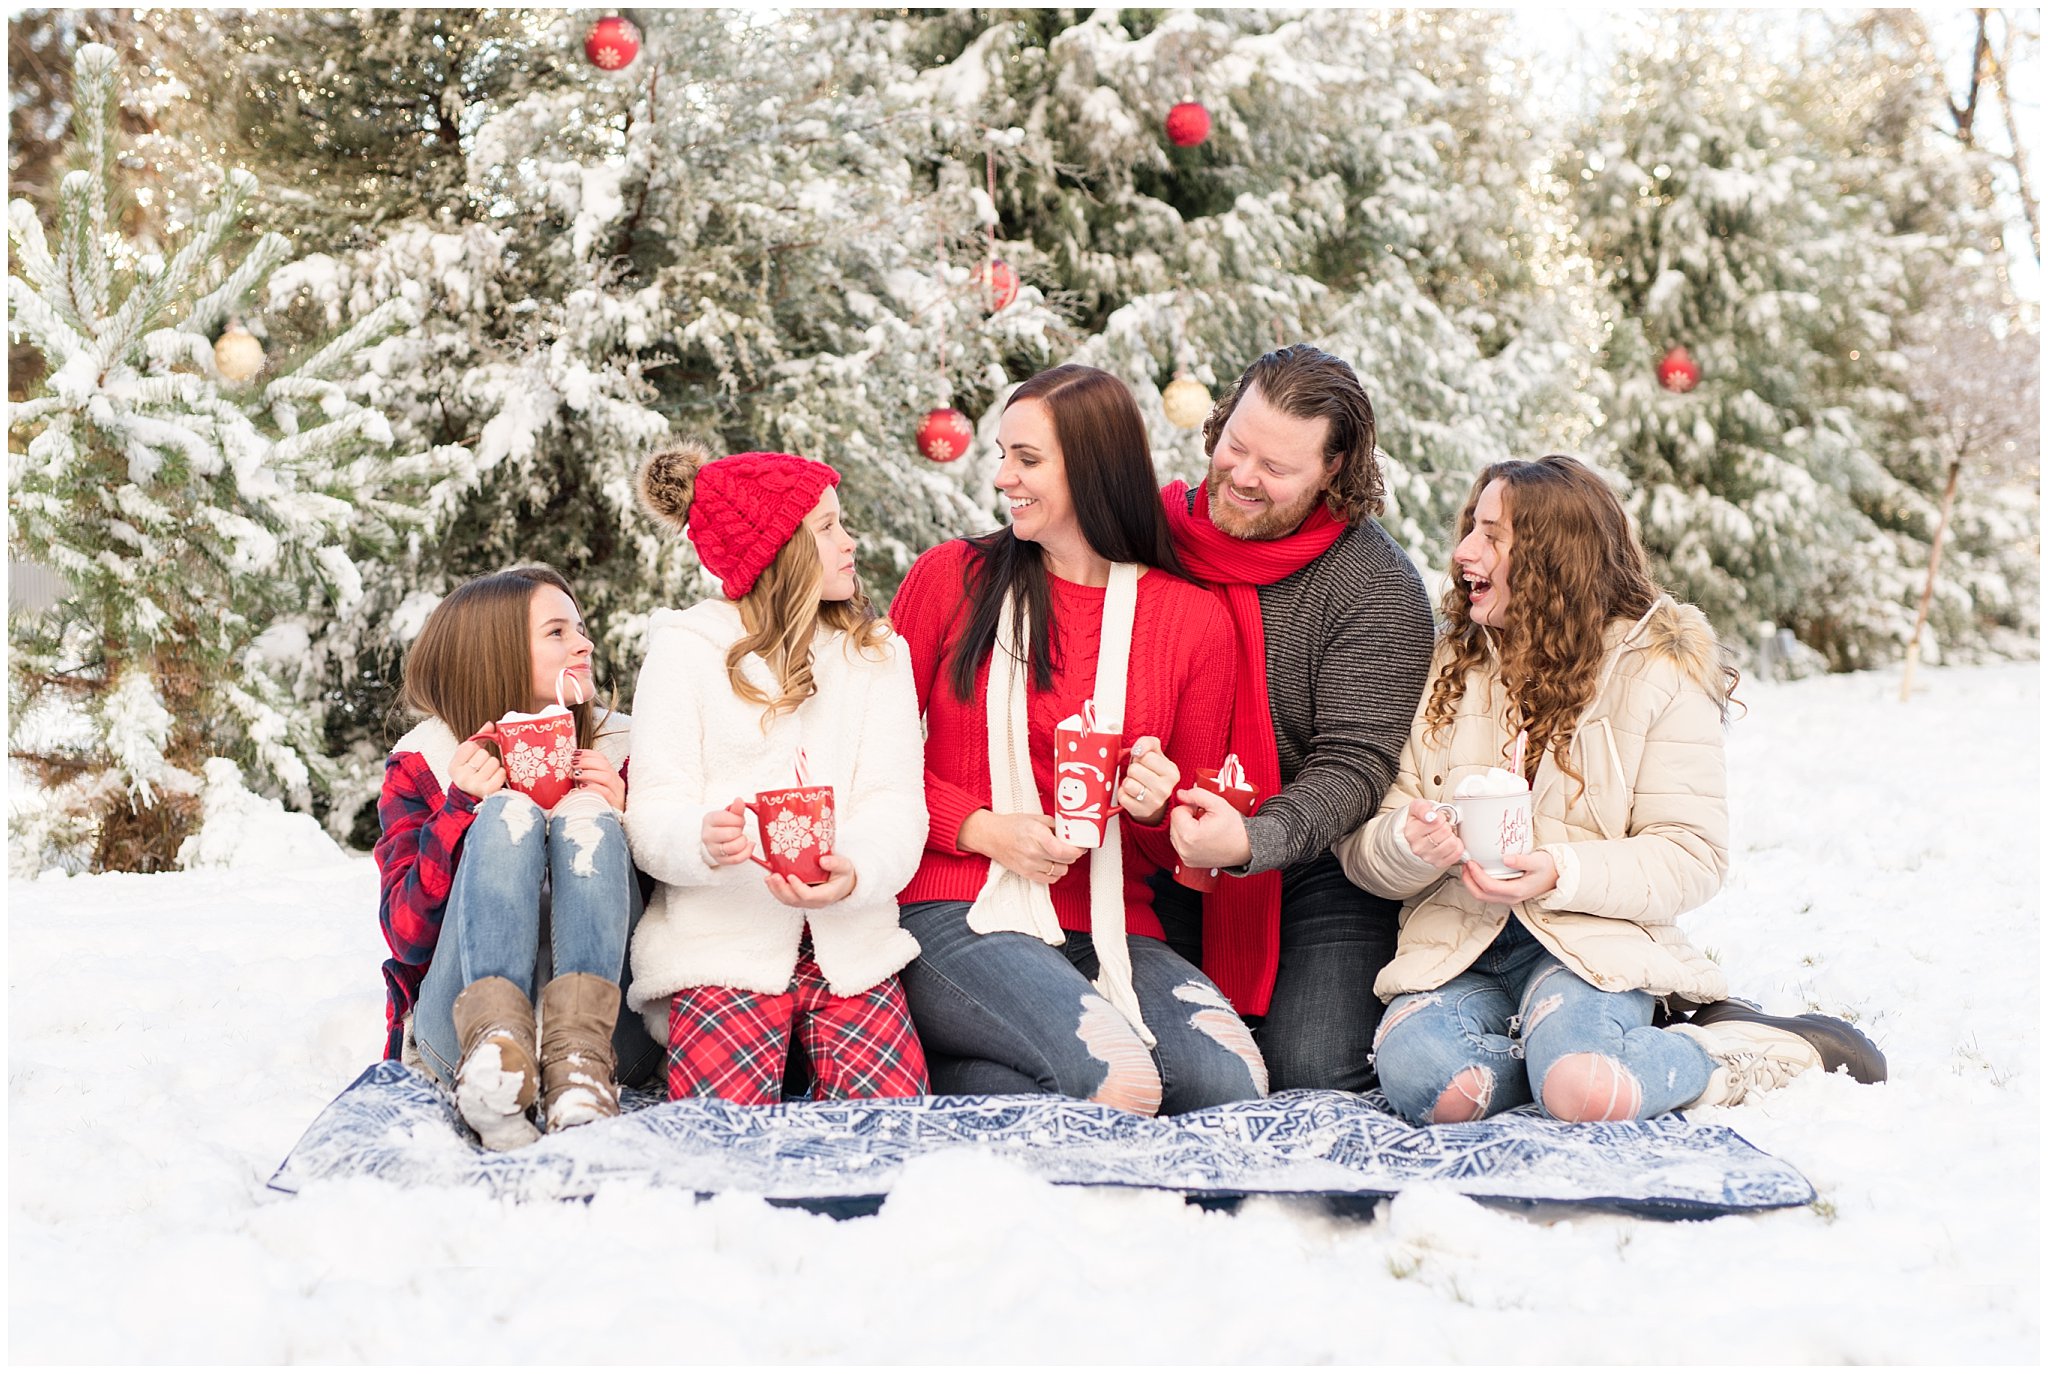 Family laughing in front of snowy Christmas trees holding hot chocolate mugs | Utah Family Christmas Photoshoot | Oak Hills Reception and Event | Jessie and Dallin Photography